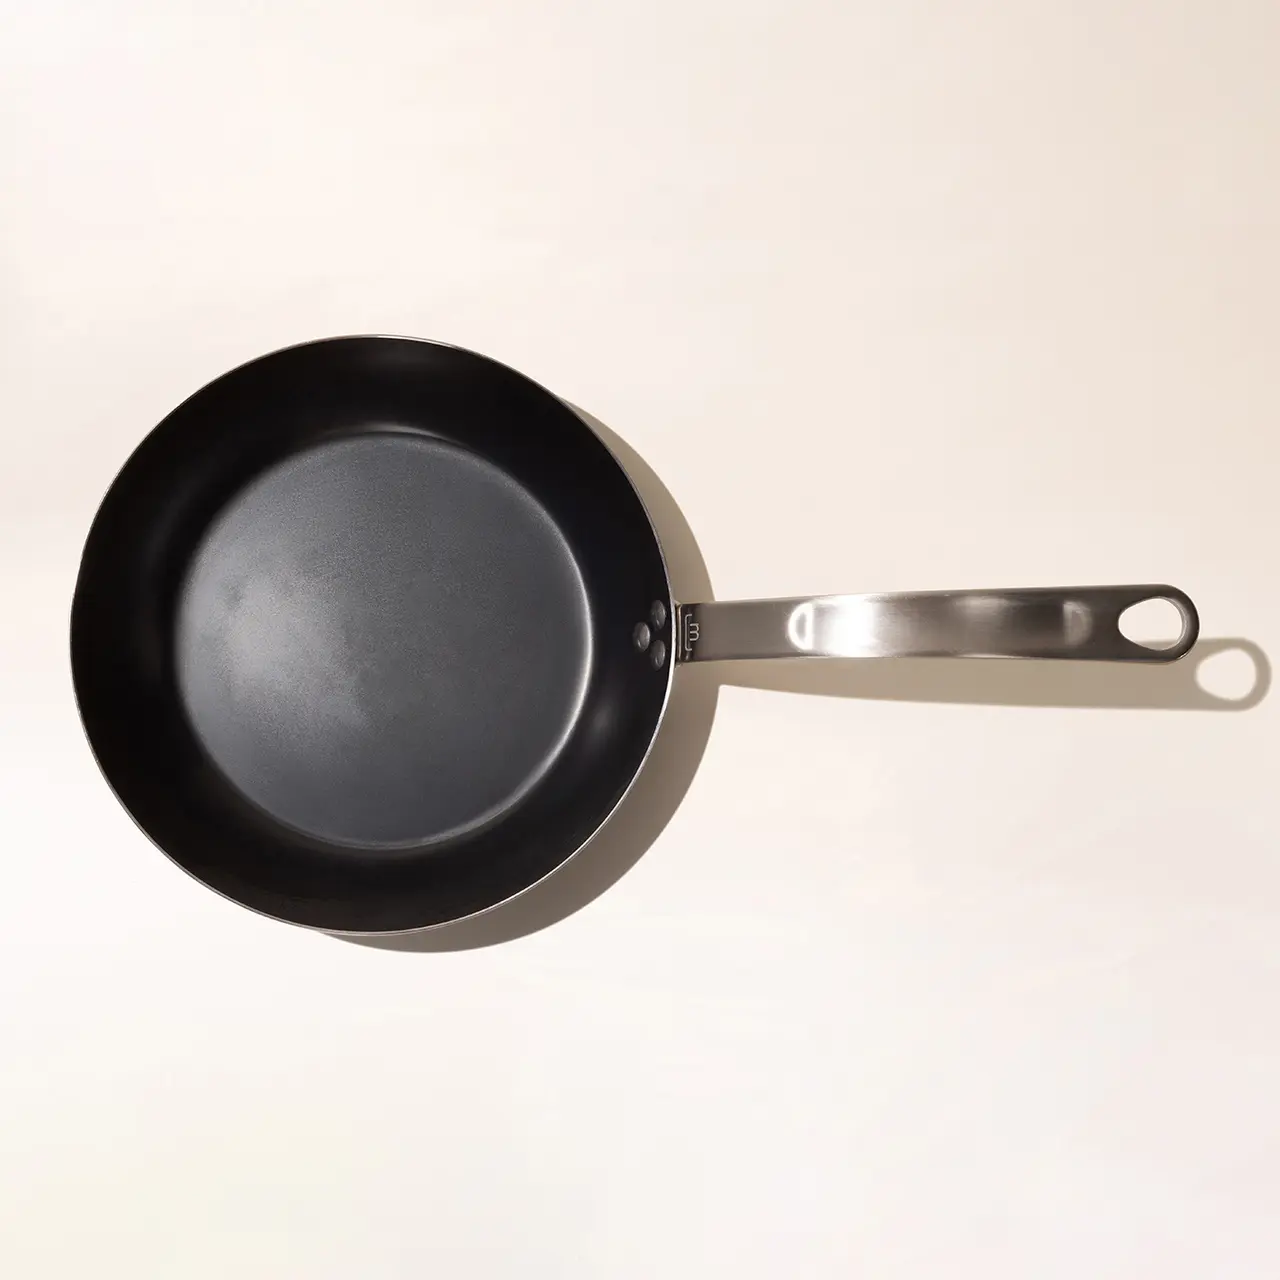 A solitary non-stick frying pan with a stainless steel handle isolated on a light background.